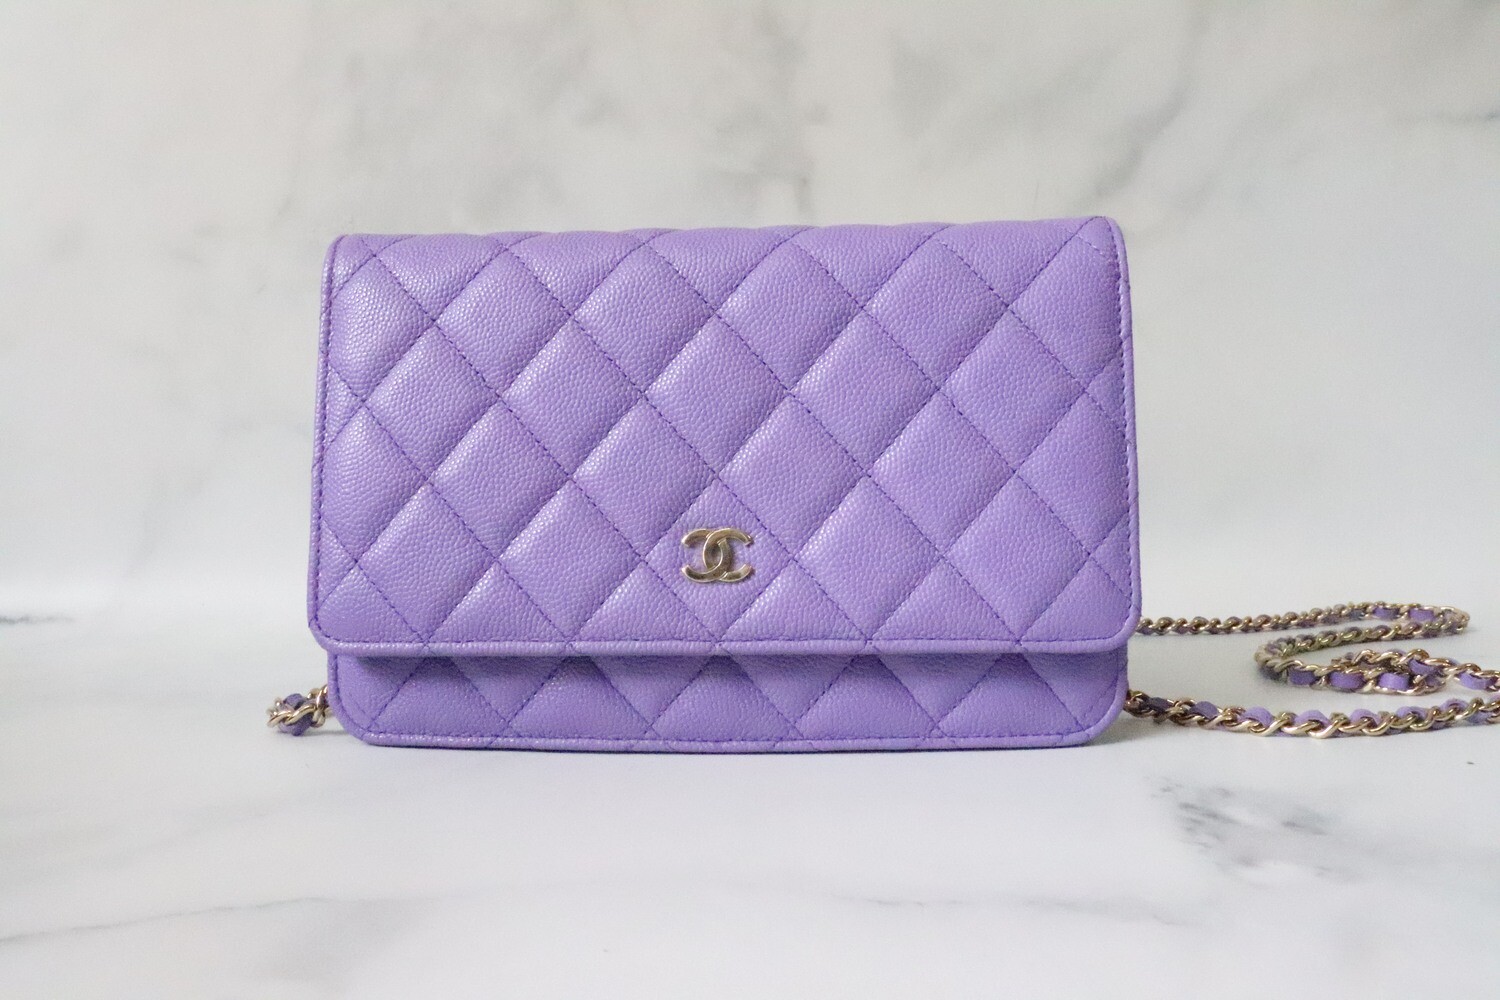 Chanel Wallet on Chain Purple Caviar Leather, Gold Hardware, Preowned in Box